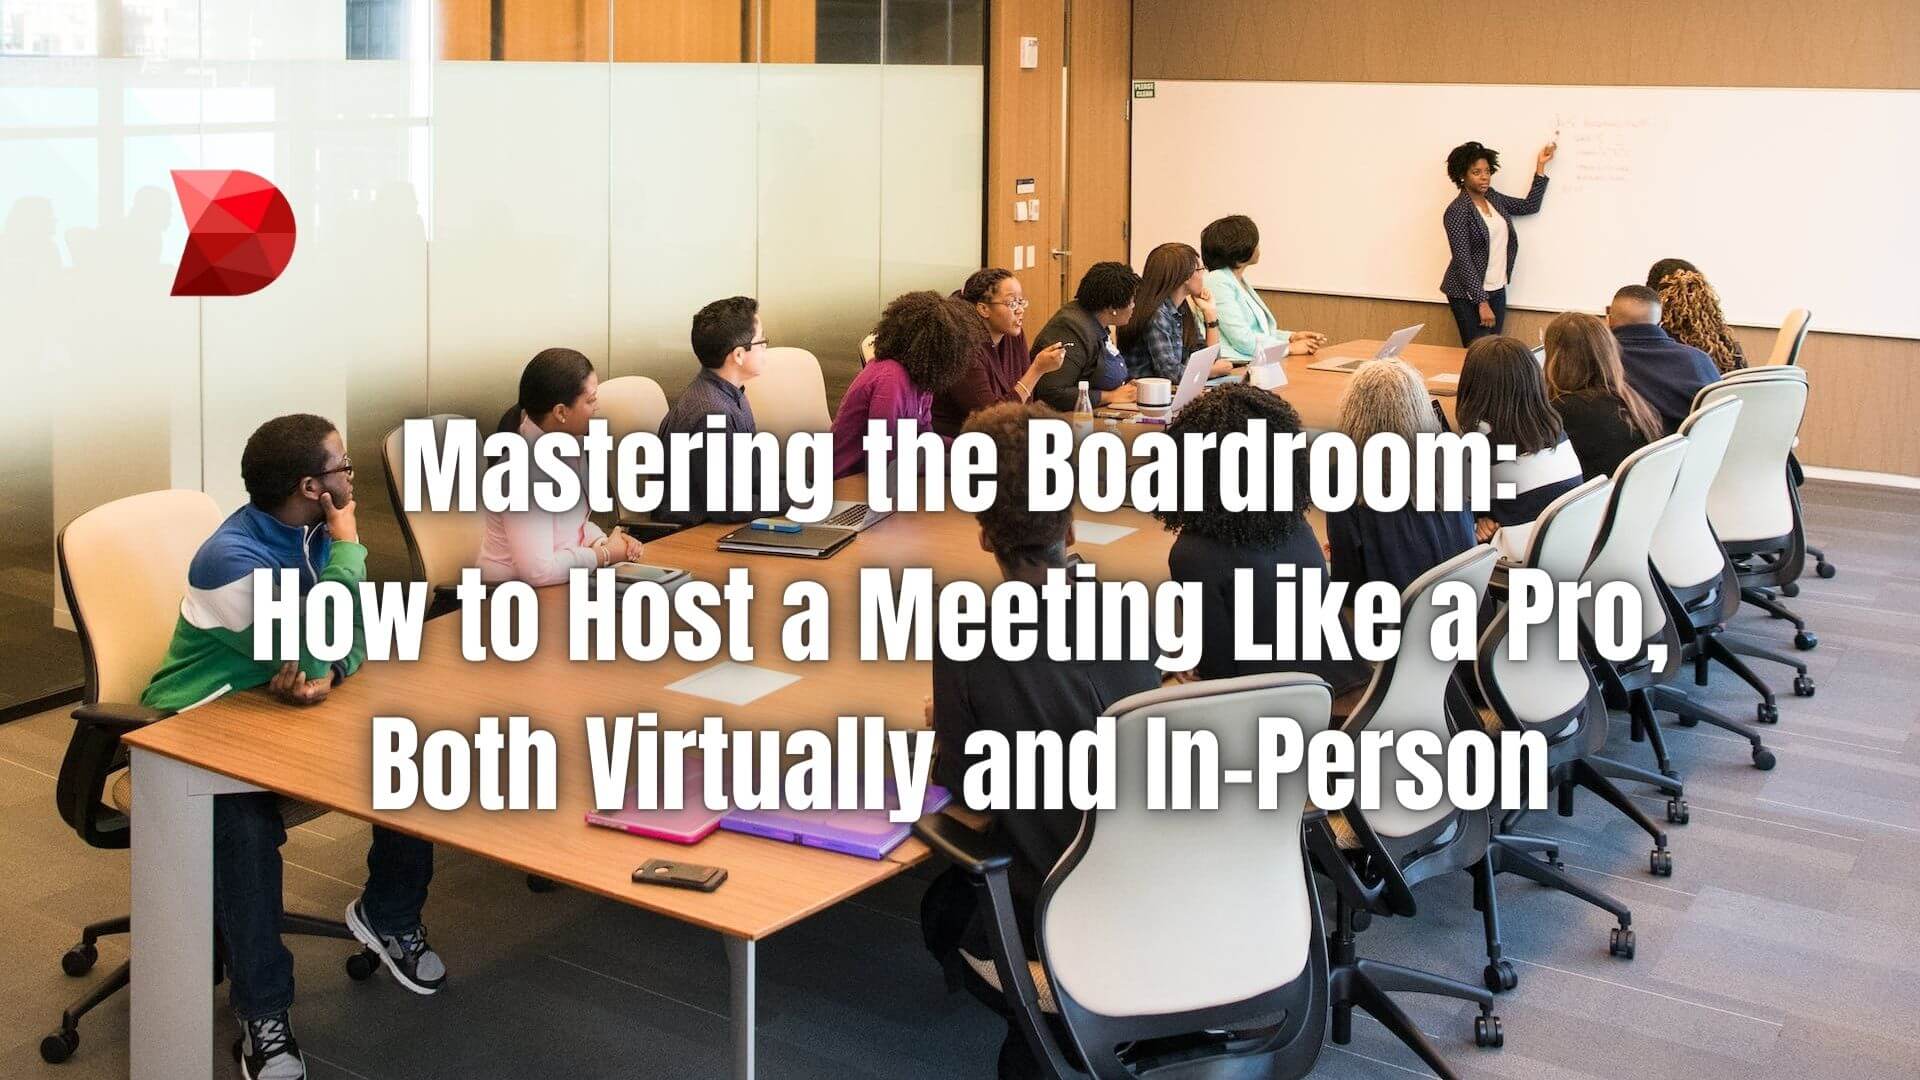 Ace your meeting hosting skills with this complete guide! Click here to discover pro tips for virtual and in-person meetings.